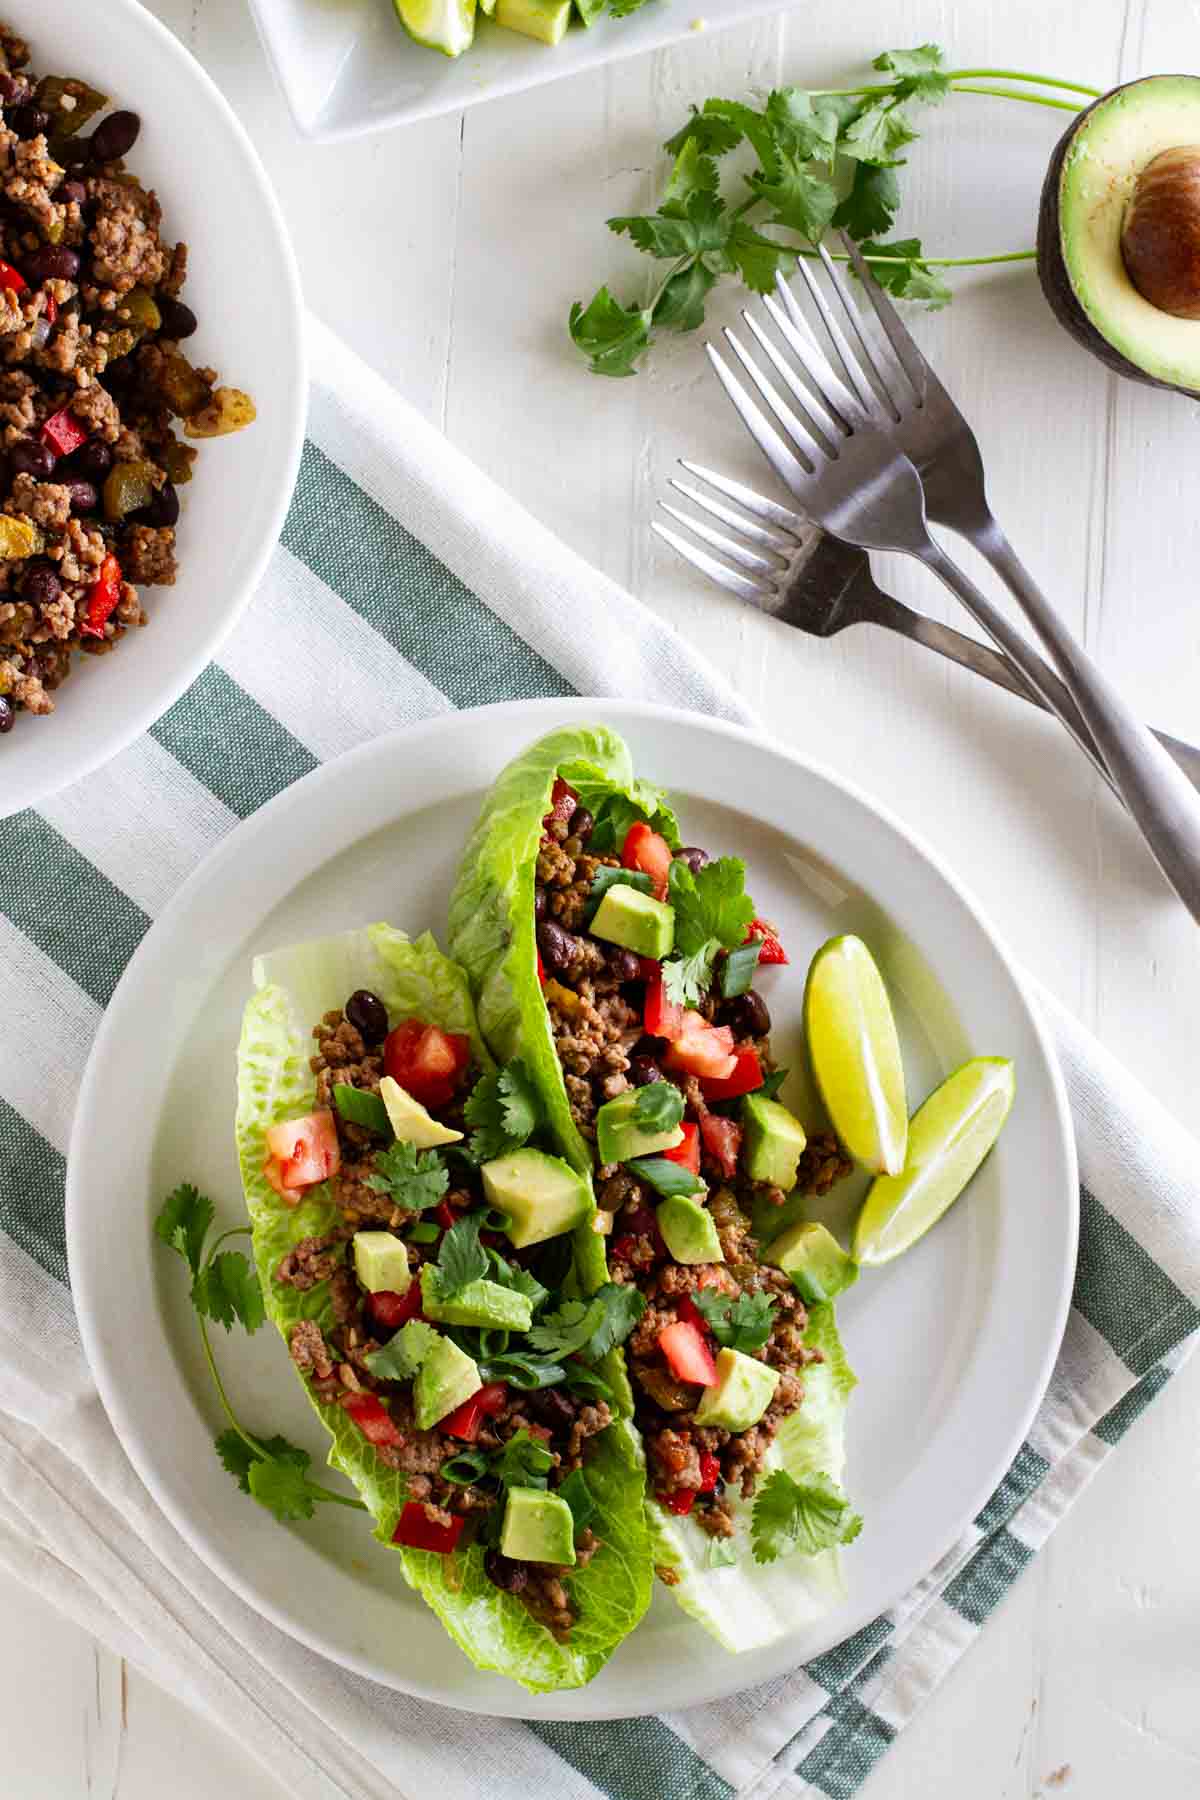 Taco lettuce wraps on a plate with forks.